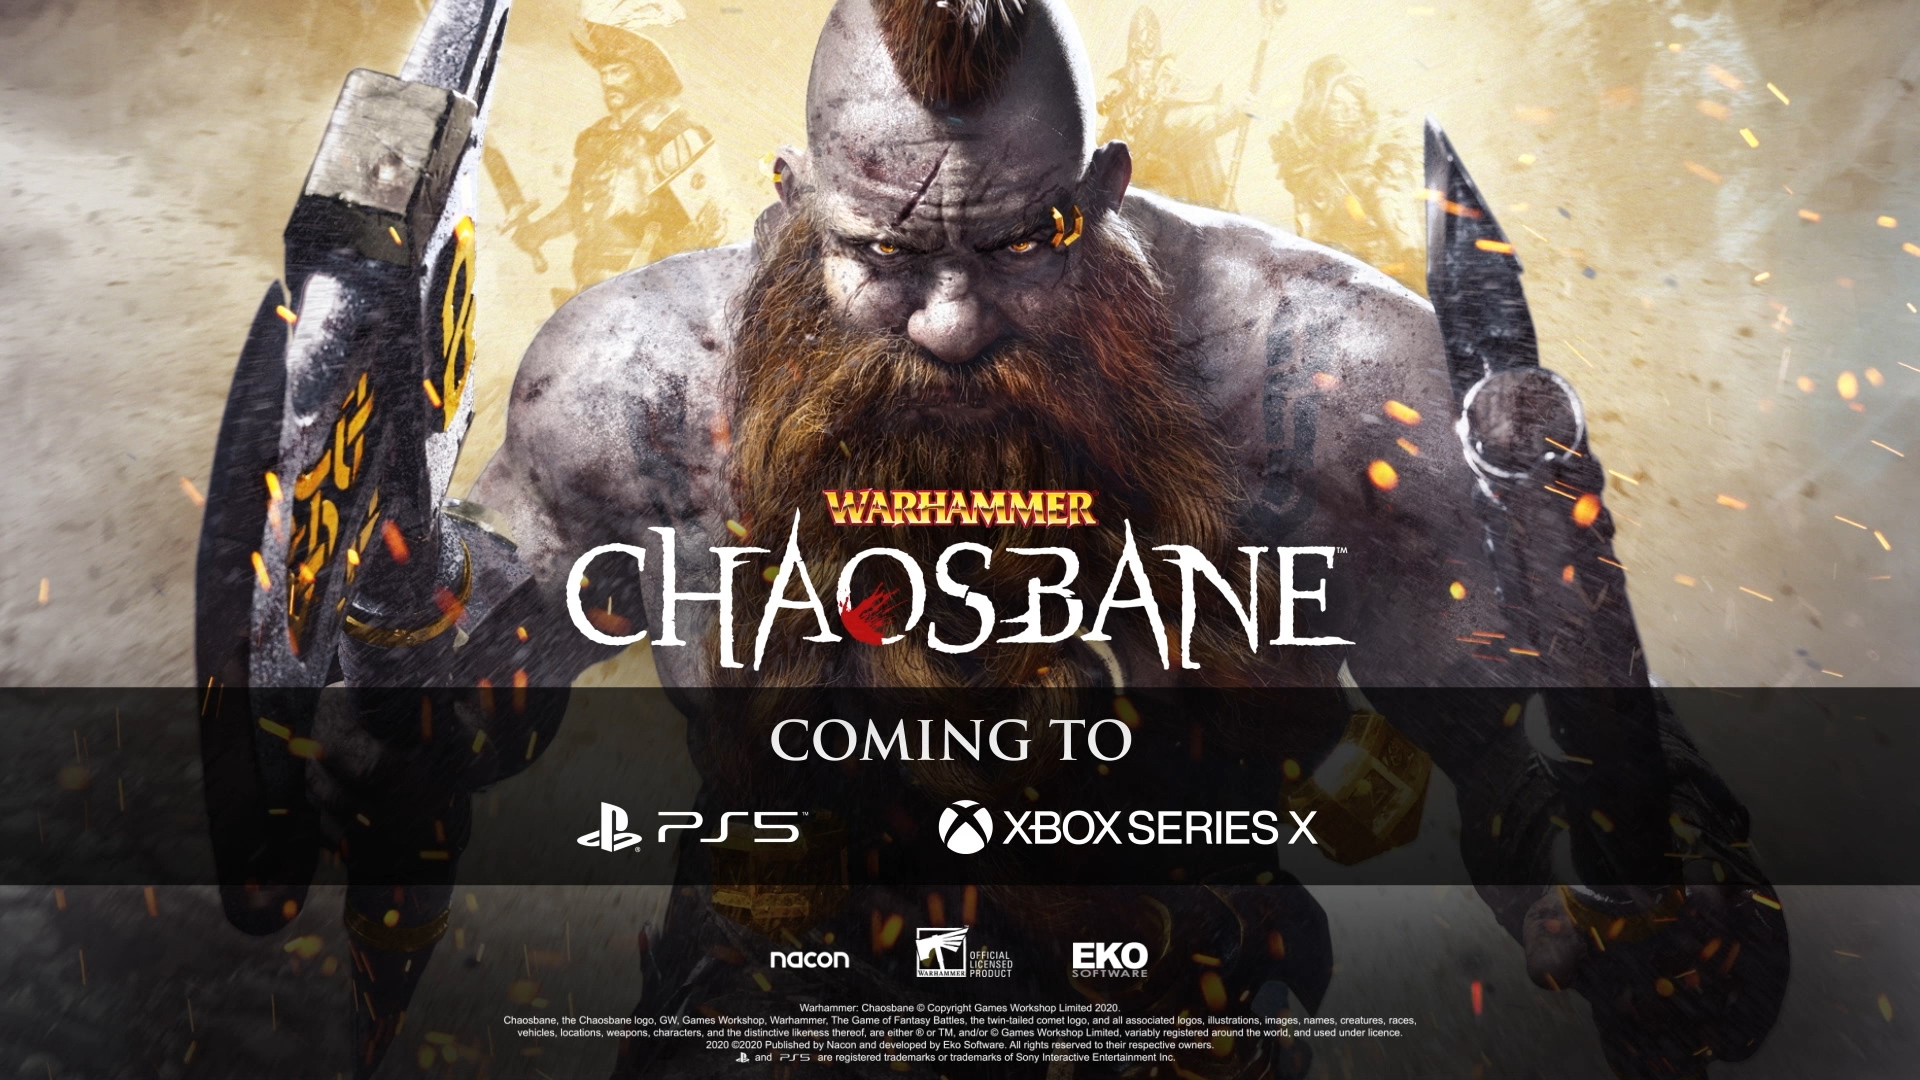 Warhammer: Chaosbane coming to Xbox Series X and PlayStation 5